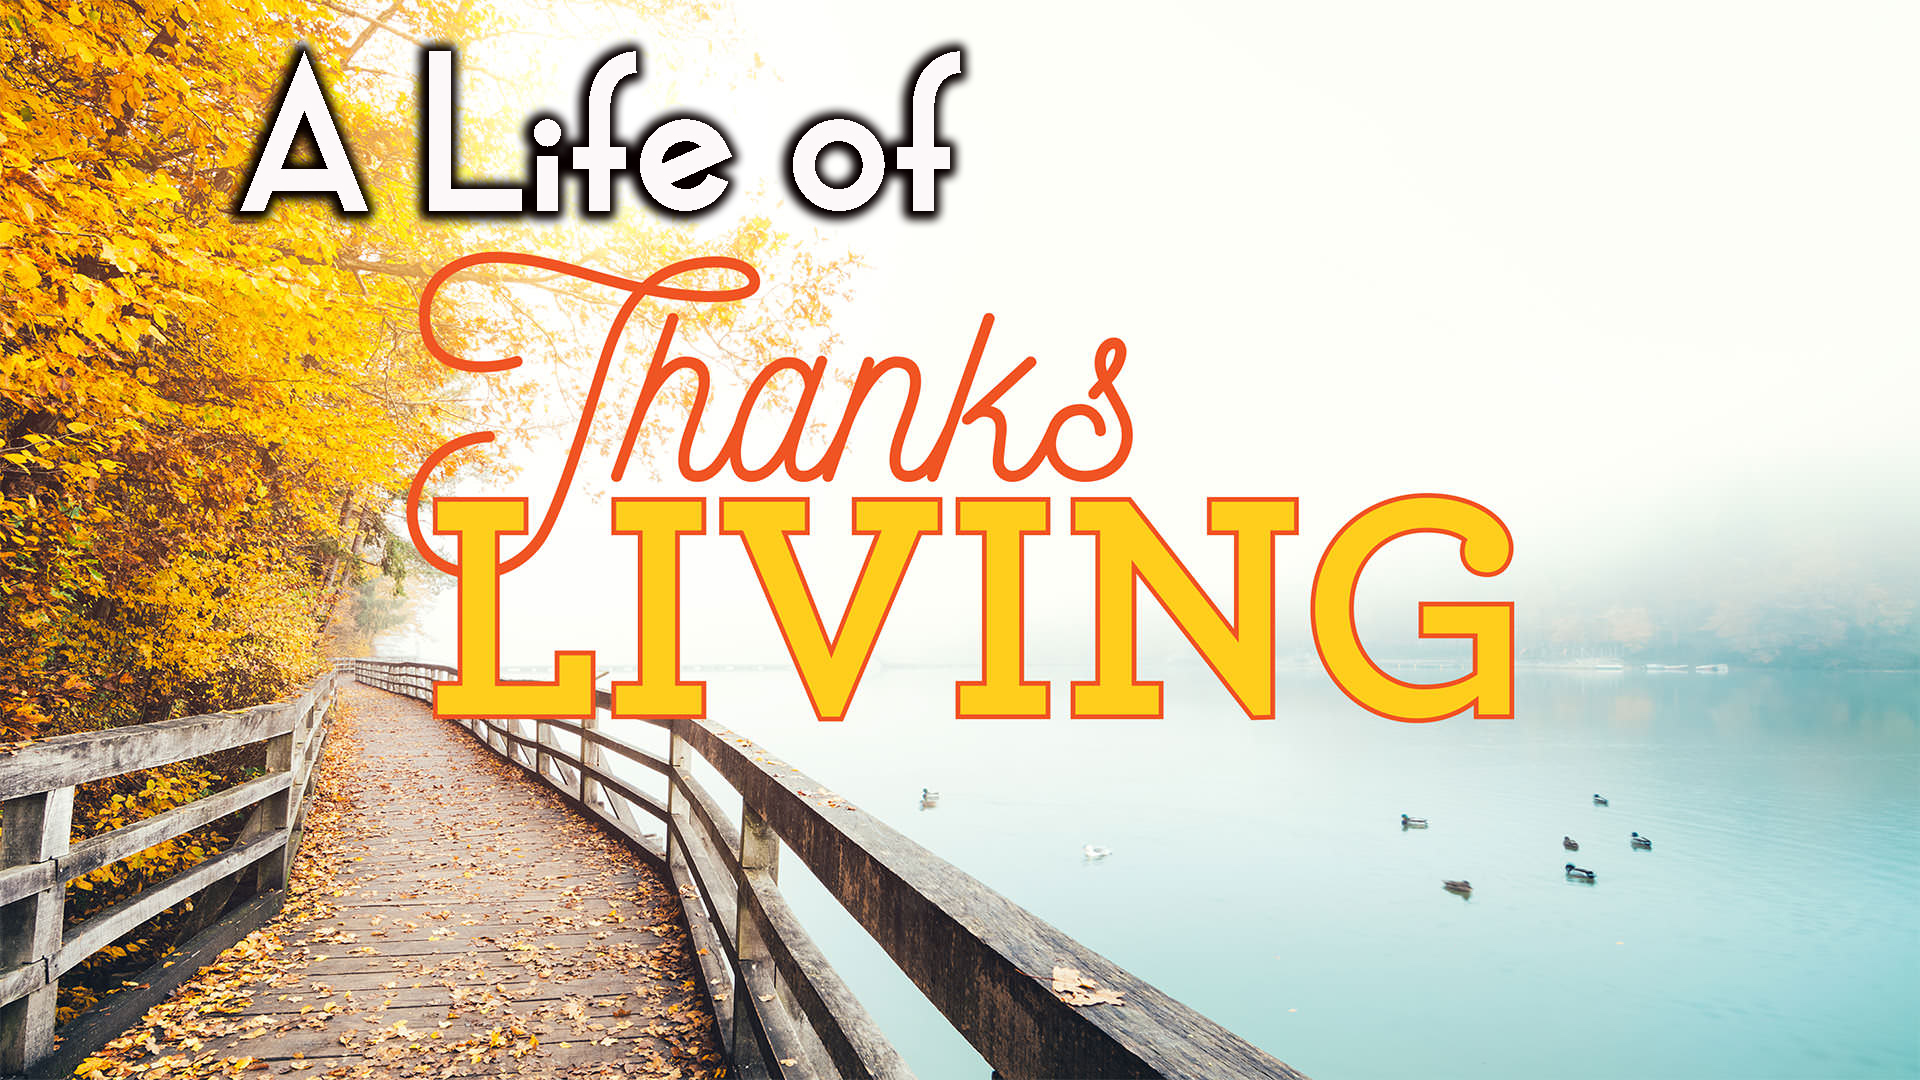 A Life of “Thanks-living”